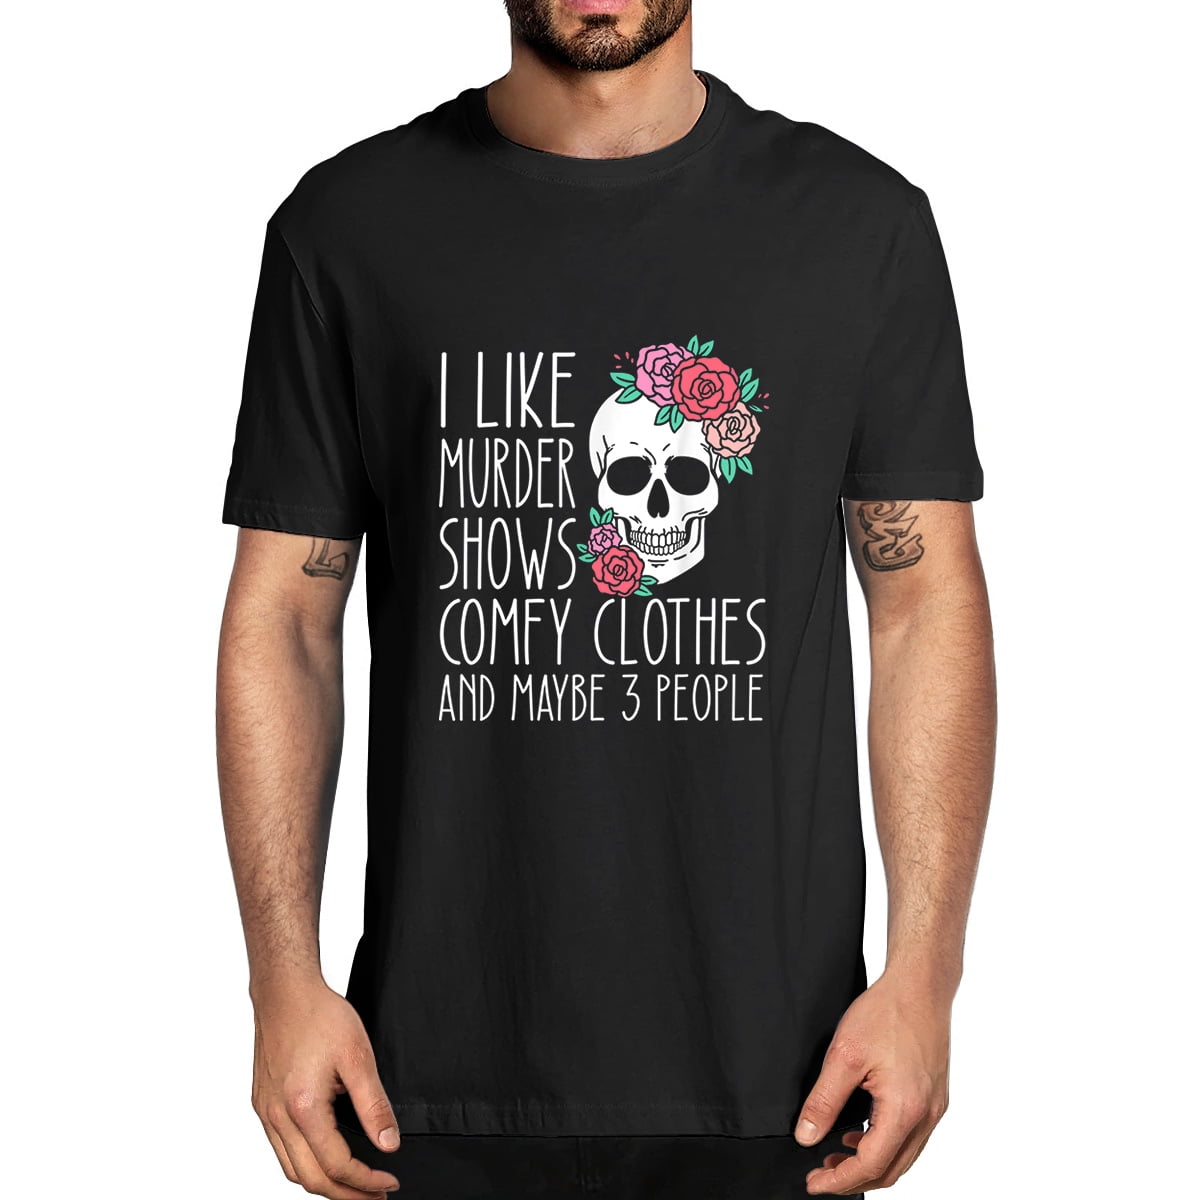 GRTXIN Skull Flower I Like Murder Shows Comfy Clothes And Maybe 3 People  T-Shirt Men's Creative Graphic T Shirt